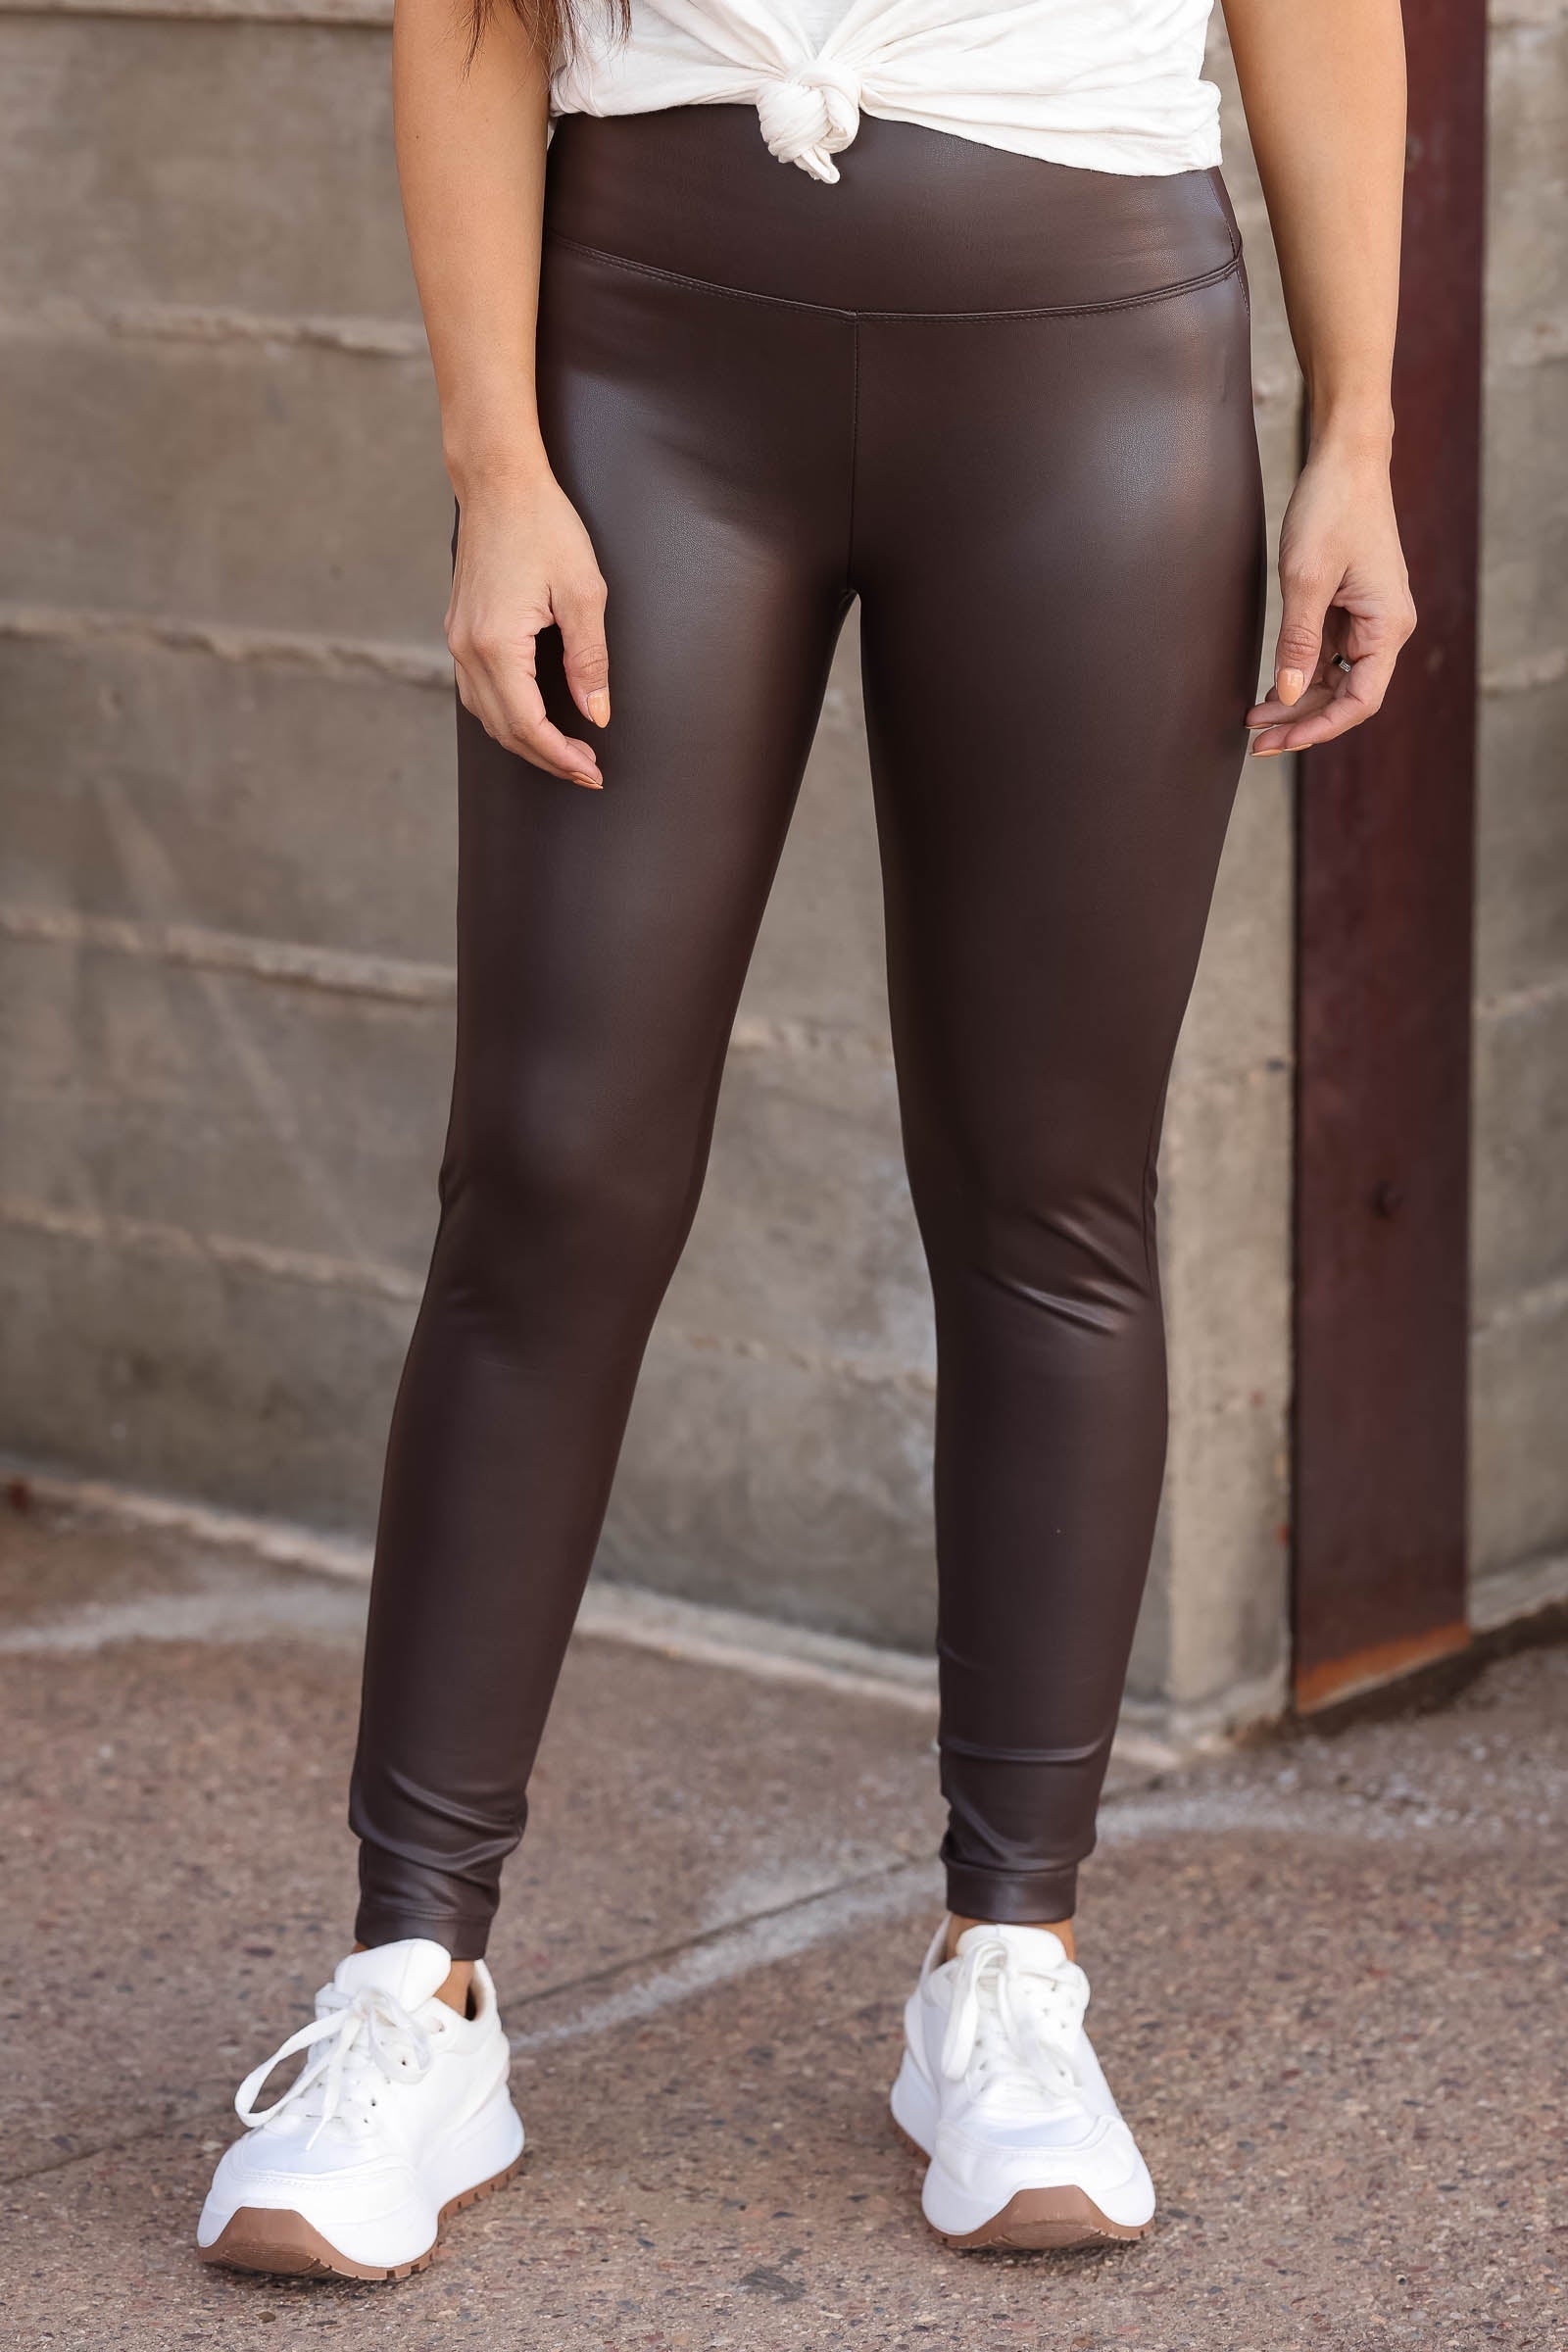 Obsessed with these new vegan leather leggings from @honeylove use